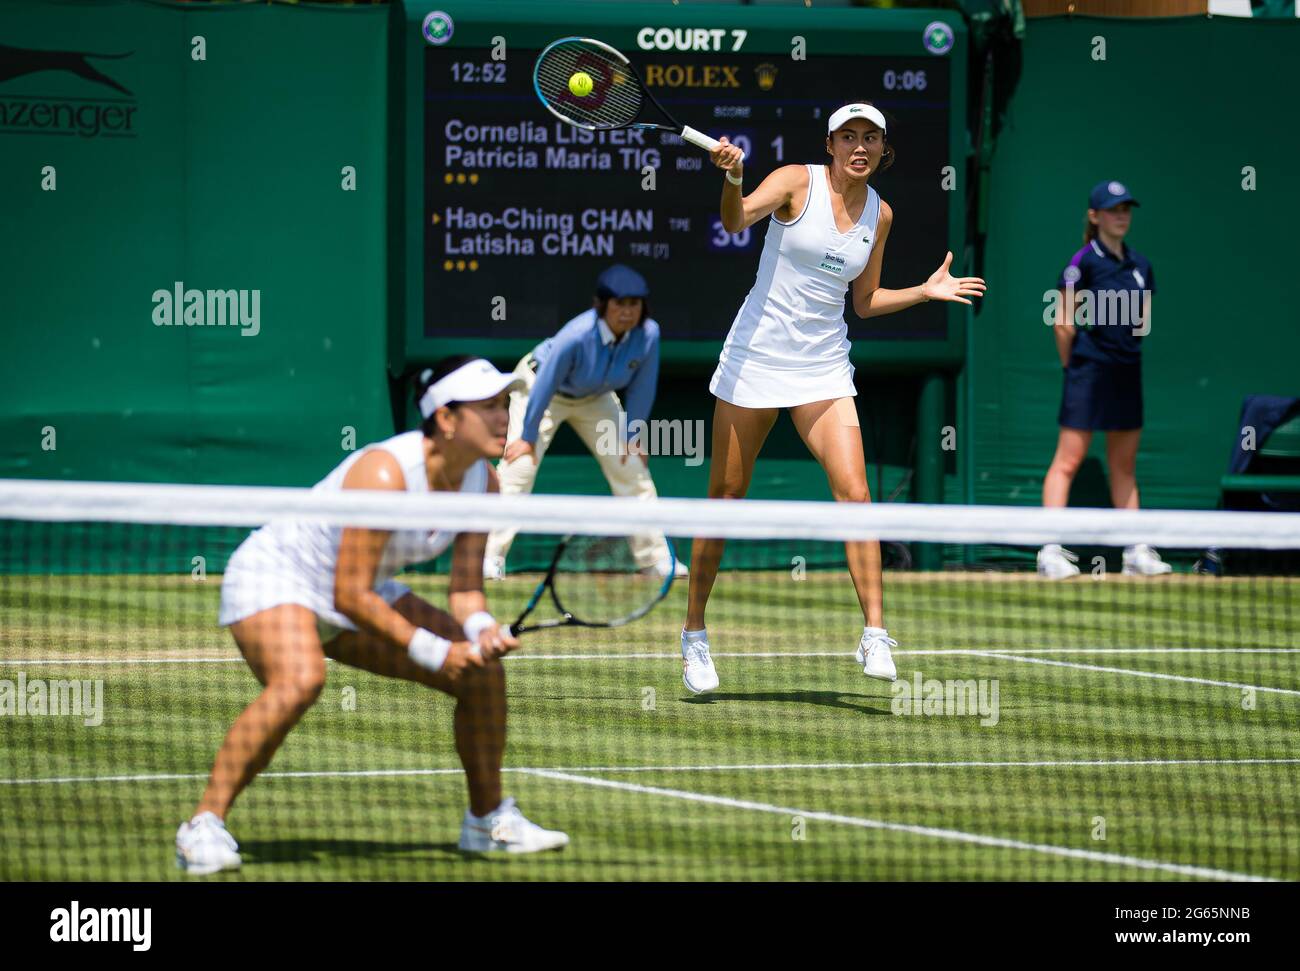 Latisha Chan and Hao-Ching Chan of Chinese Taipeh playing doubles at The Championships Wimbledon 2021, Grand Slam tennis tournament on July 2, 2021 at All England Lawn Tennis and Croquet Club in London, England - Photo Rob Prange / Spain DPPI / DPPI Stock Photo